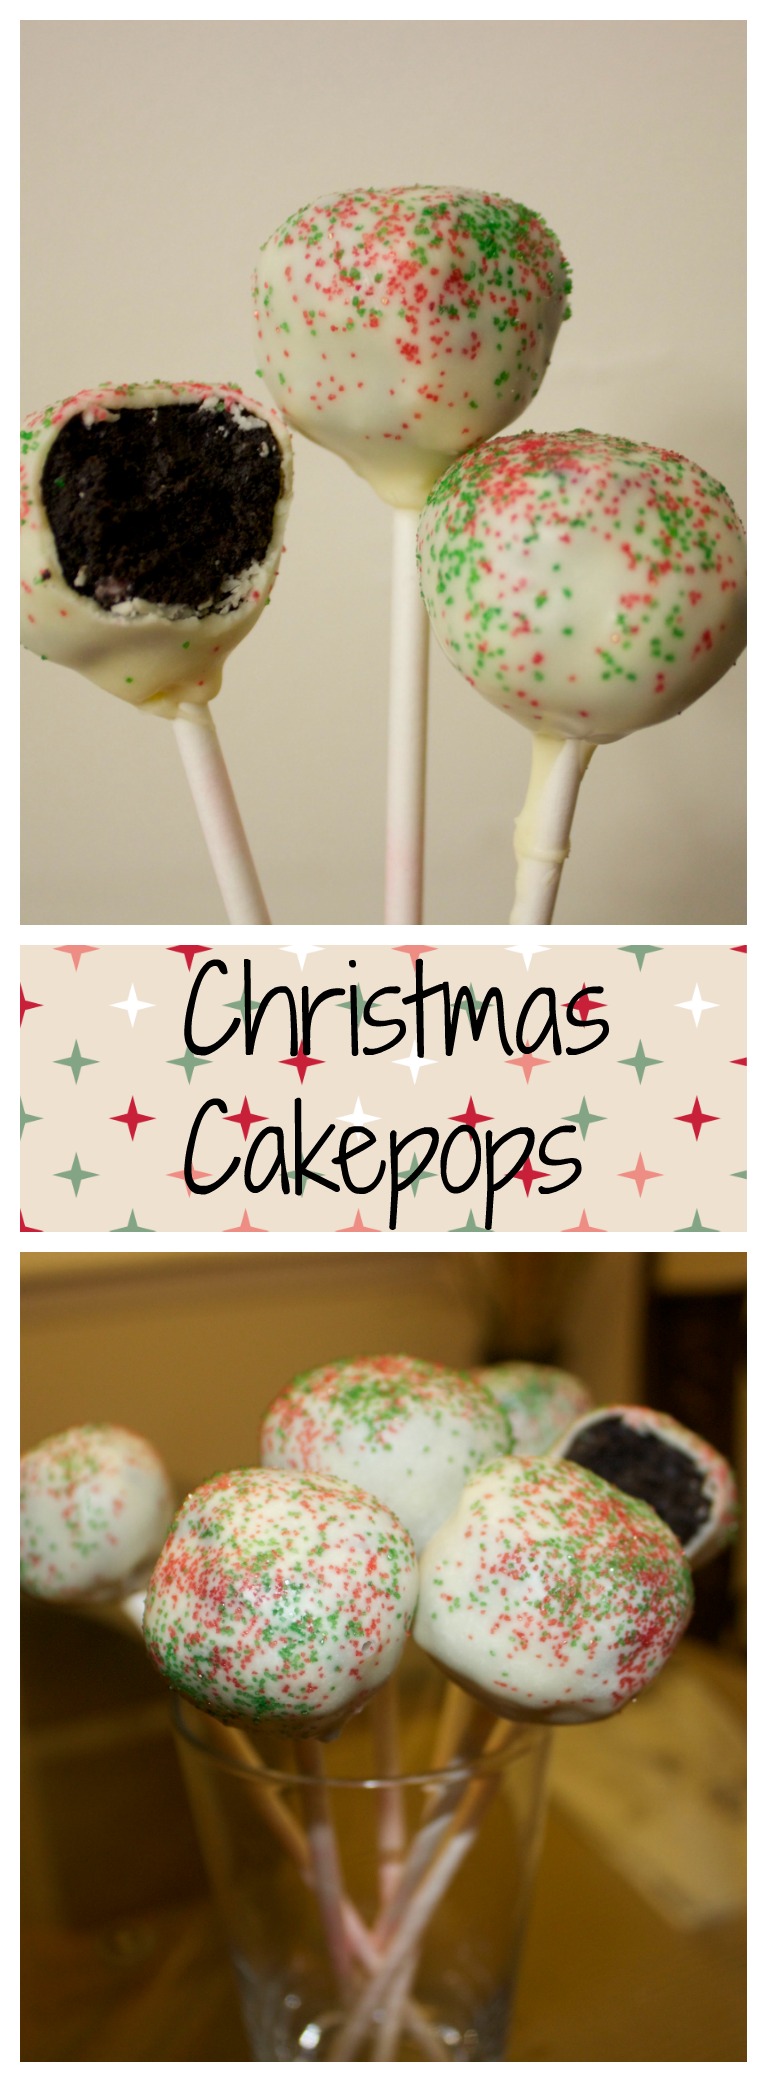 Christmas Cake Pops: Oreo Peppermint cake pops covered in white chocolate and sprinkled with red and green sugar crystals.